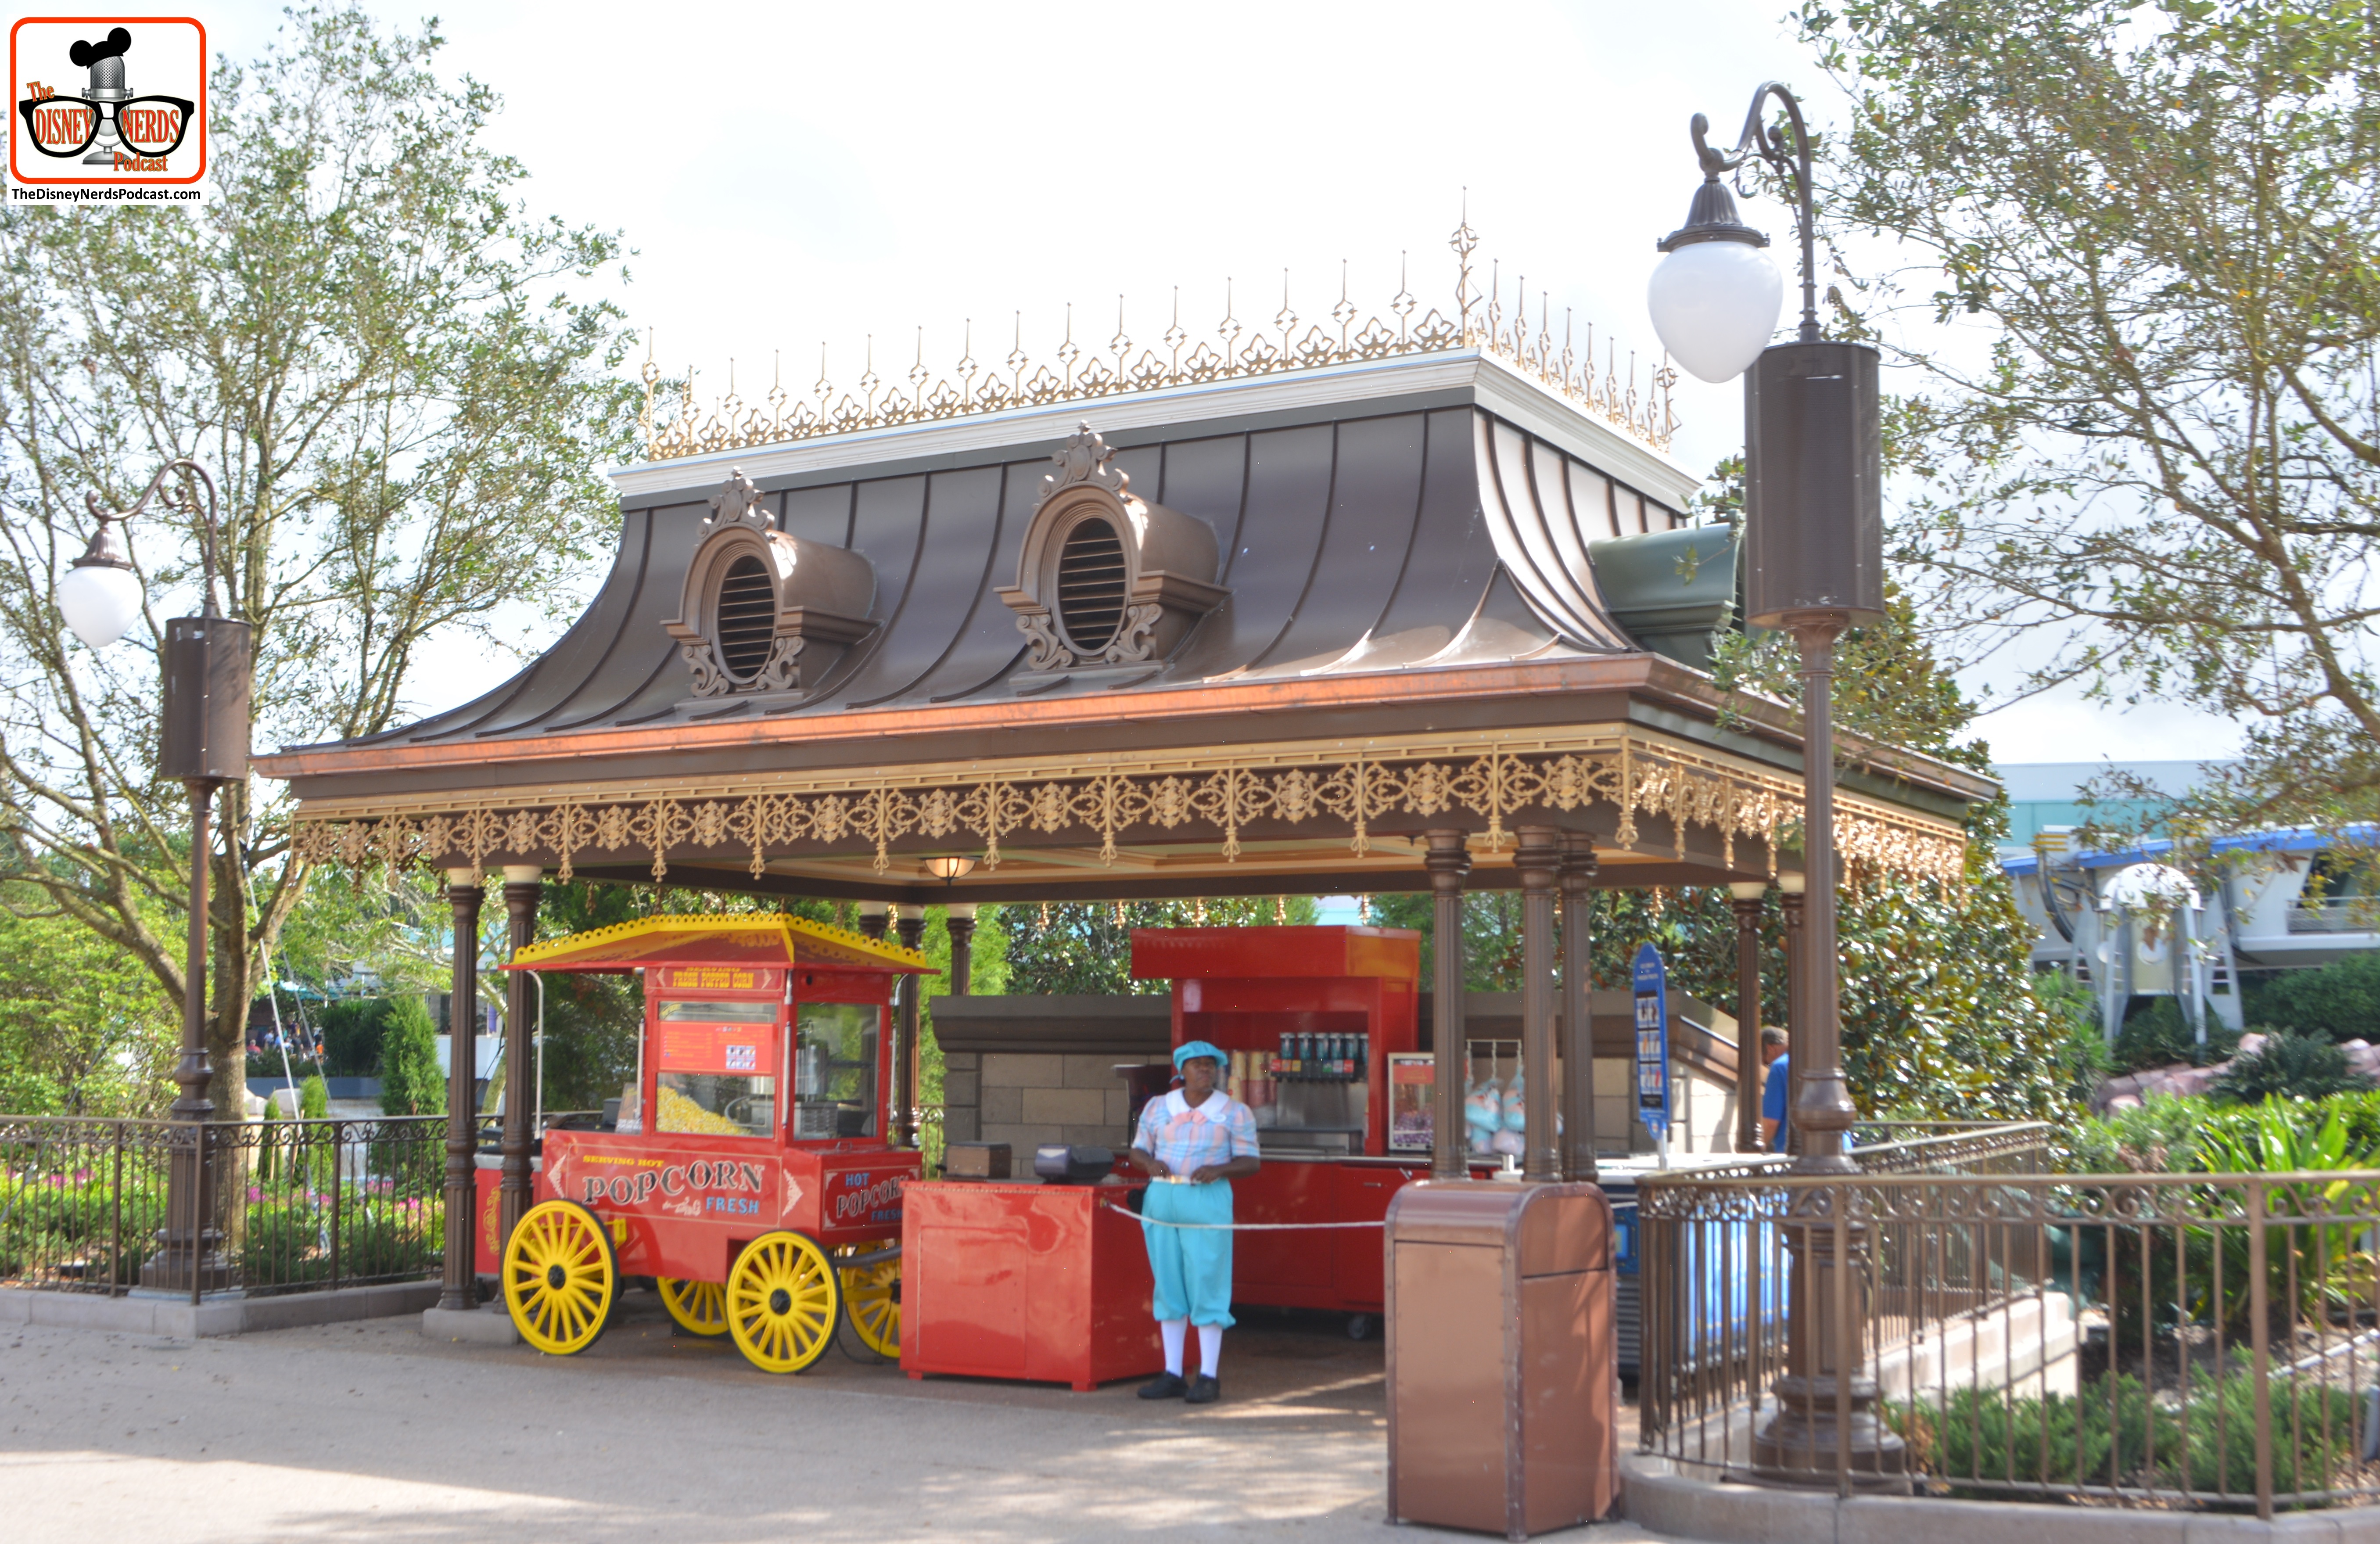 The new hub - outside circle - features two new popcorn/ice cream carts.. much bigger than the previous stands near the castle (the old stands where replaced by the new turrets_